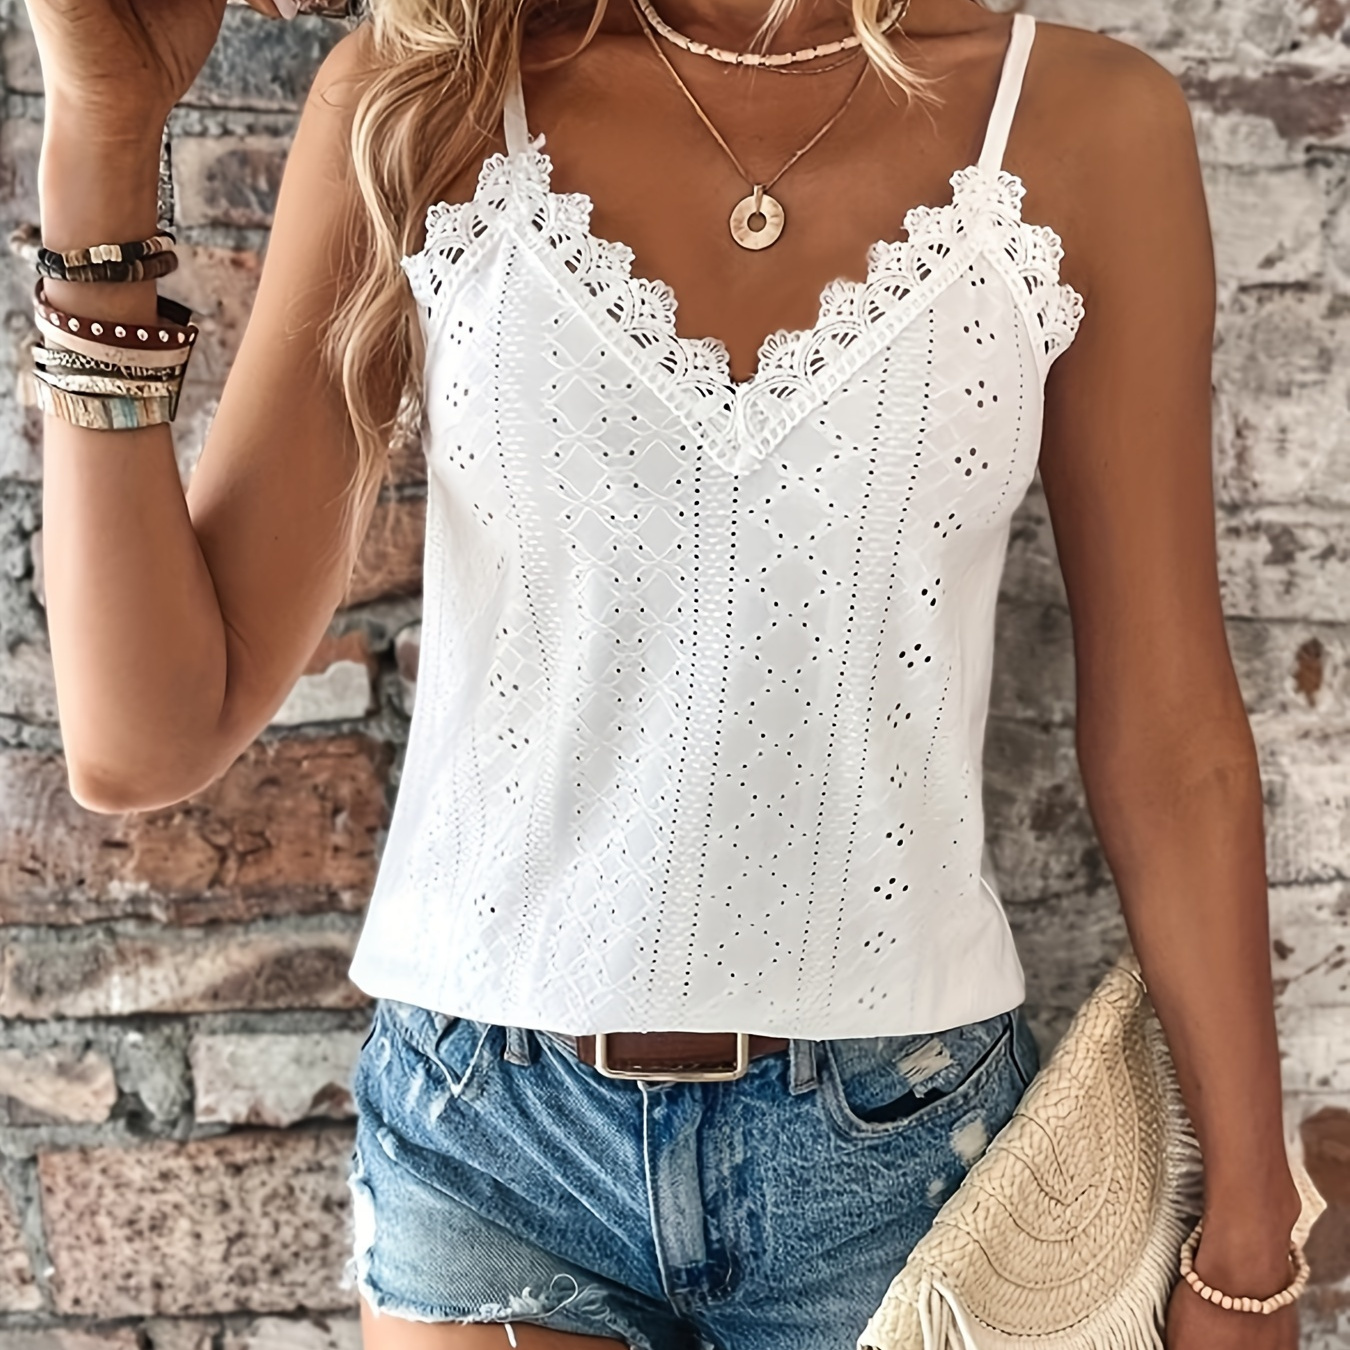 

Contrast Lace Spaghetti Strap Top, Casual V-neck Eyelet Sleeveless Cami Top For Summer, Women's Clothing